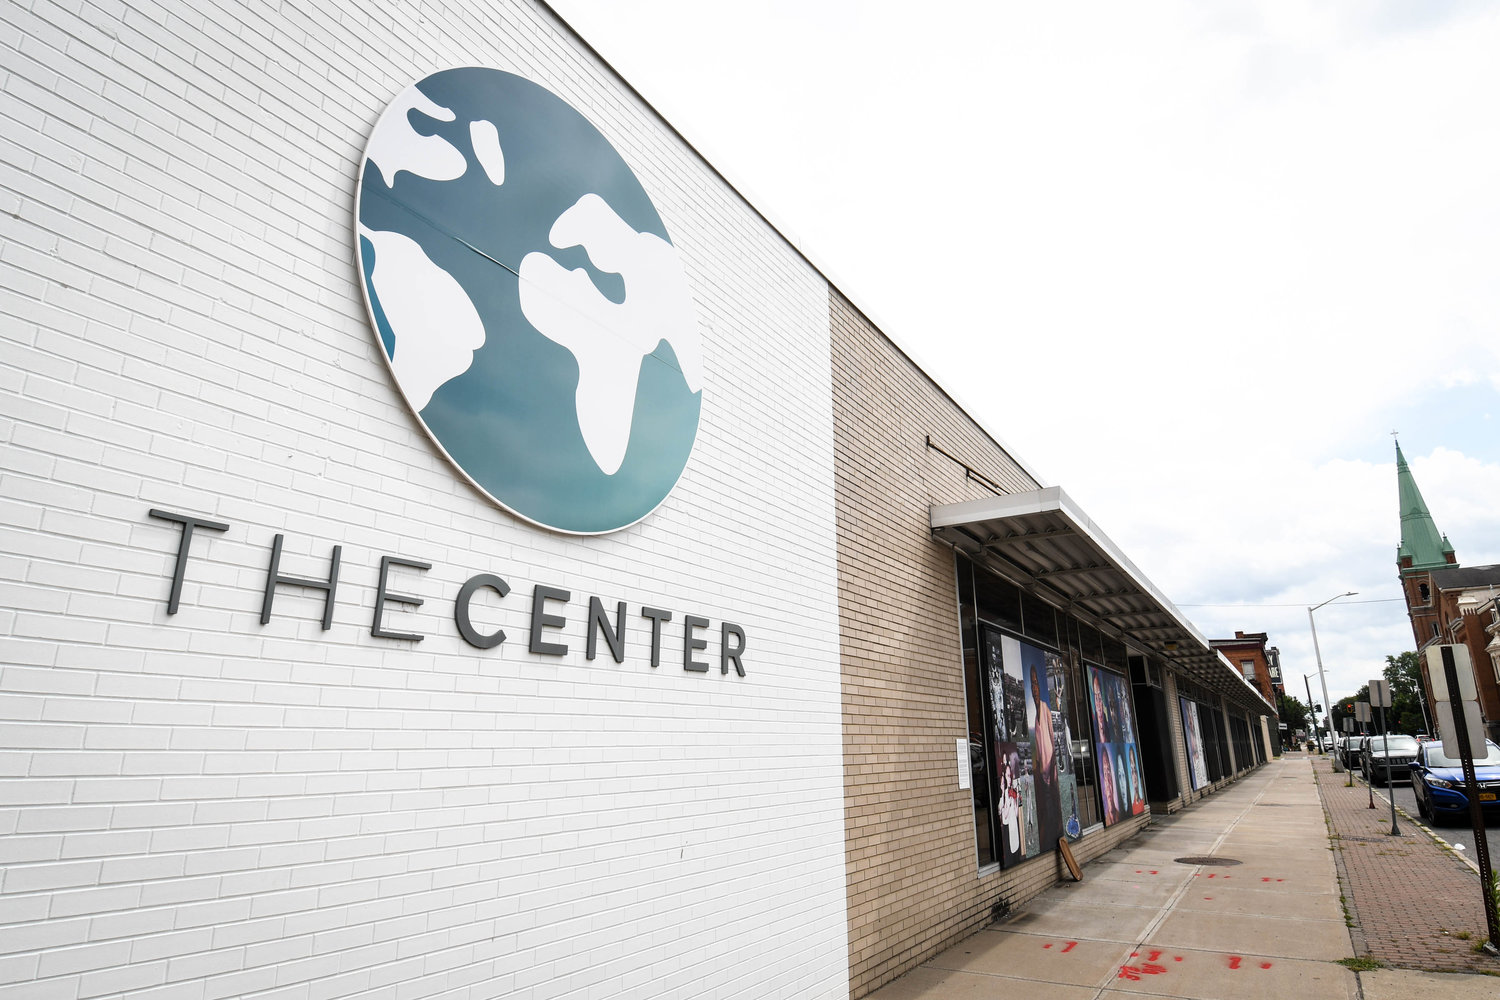 The Center, located at 201 Bleecker St. in Utica, is one of the 17 refugee centers across New York State that has received funding to continue assisting displaced Ukrainians.